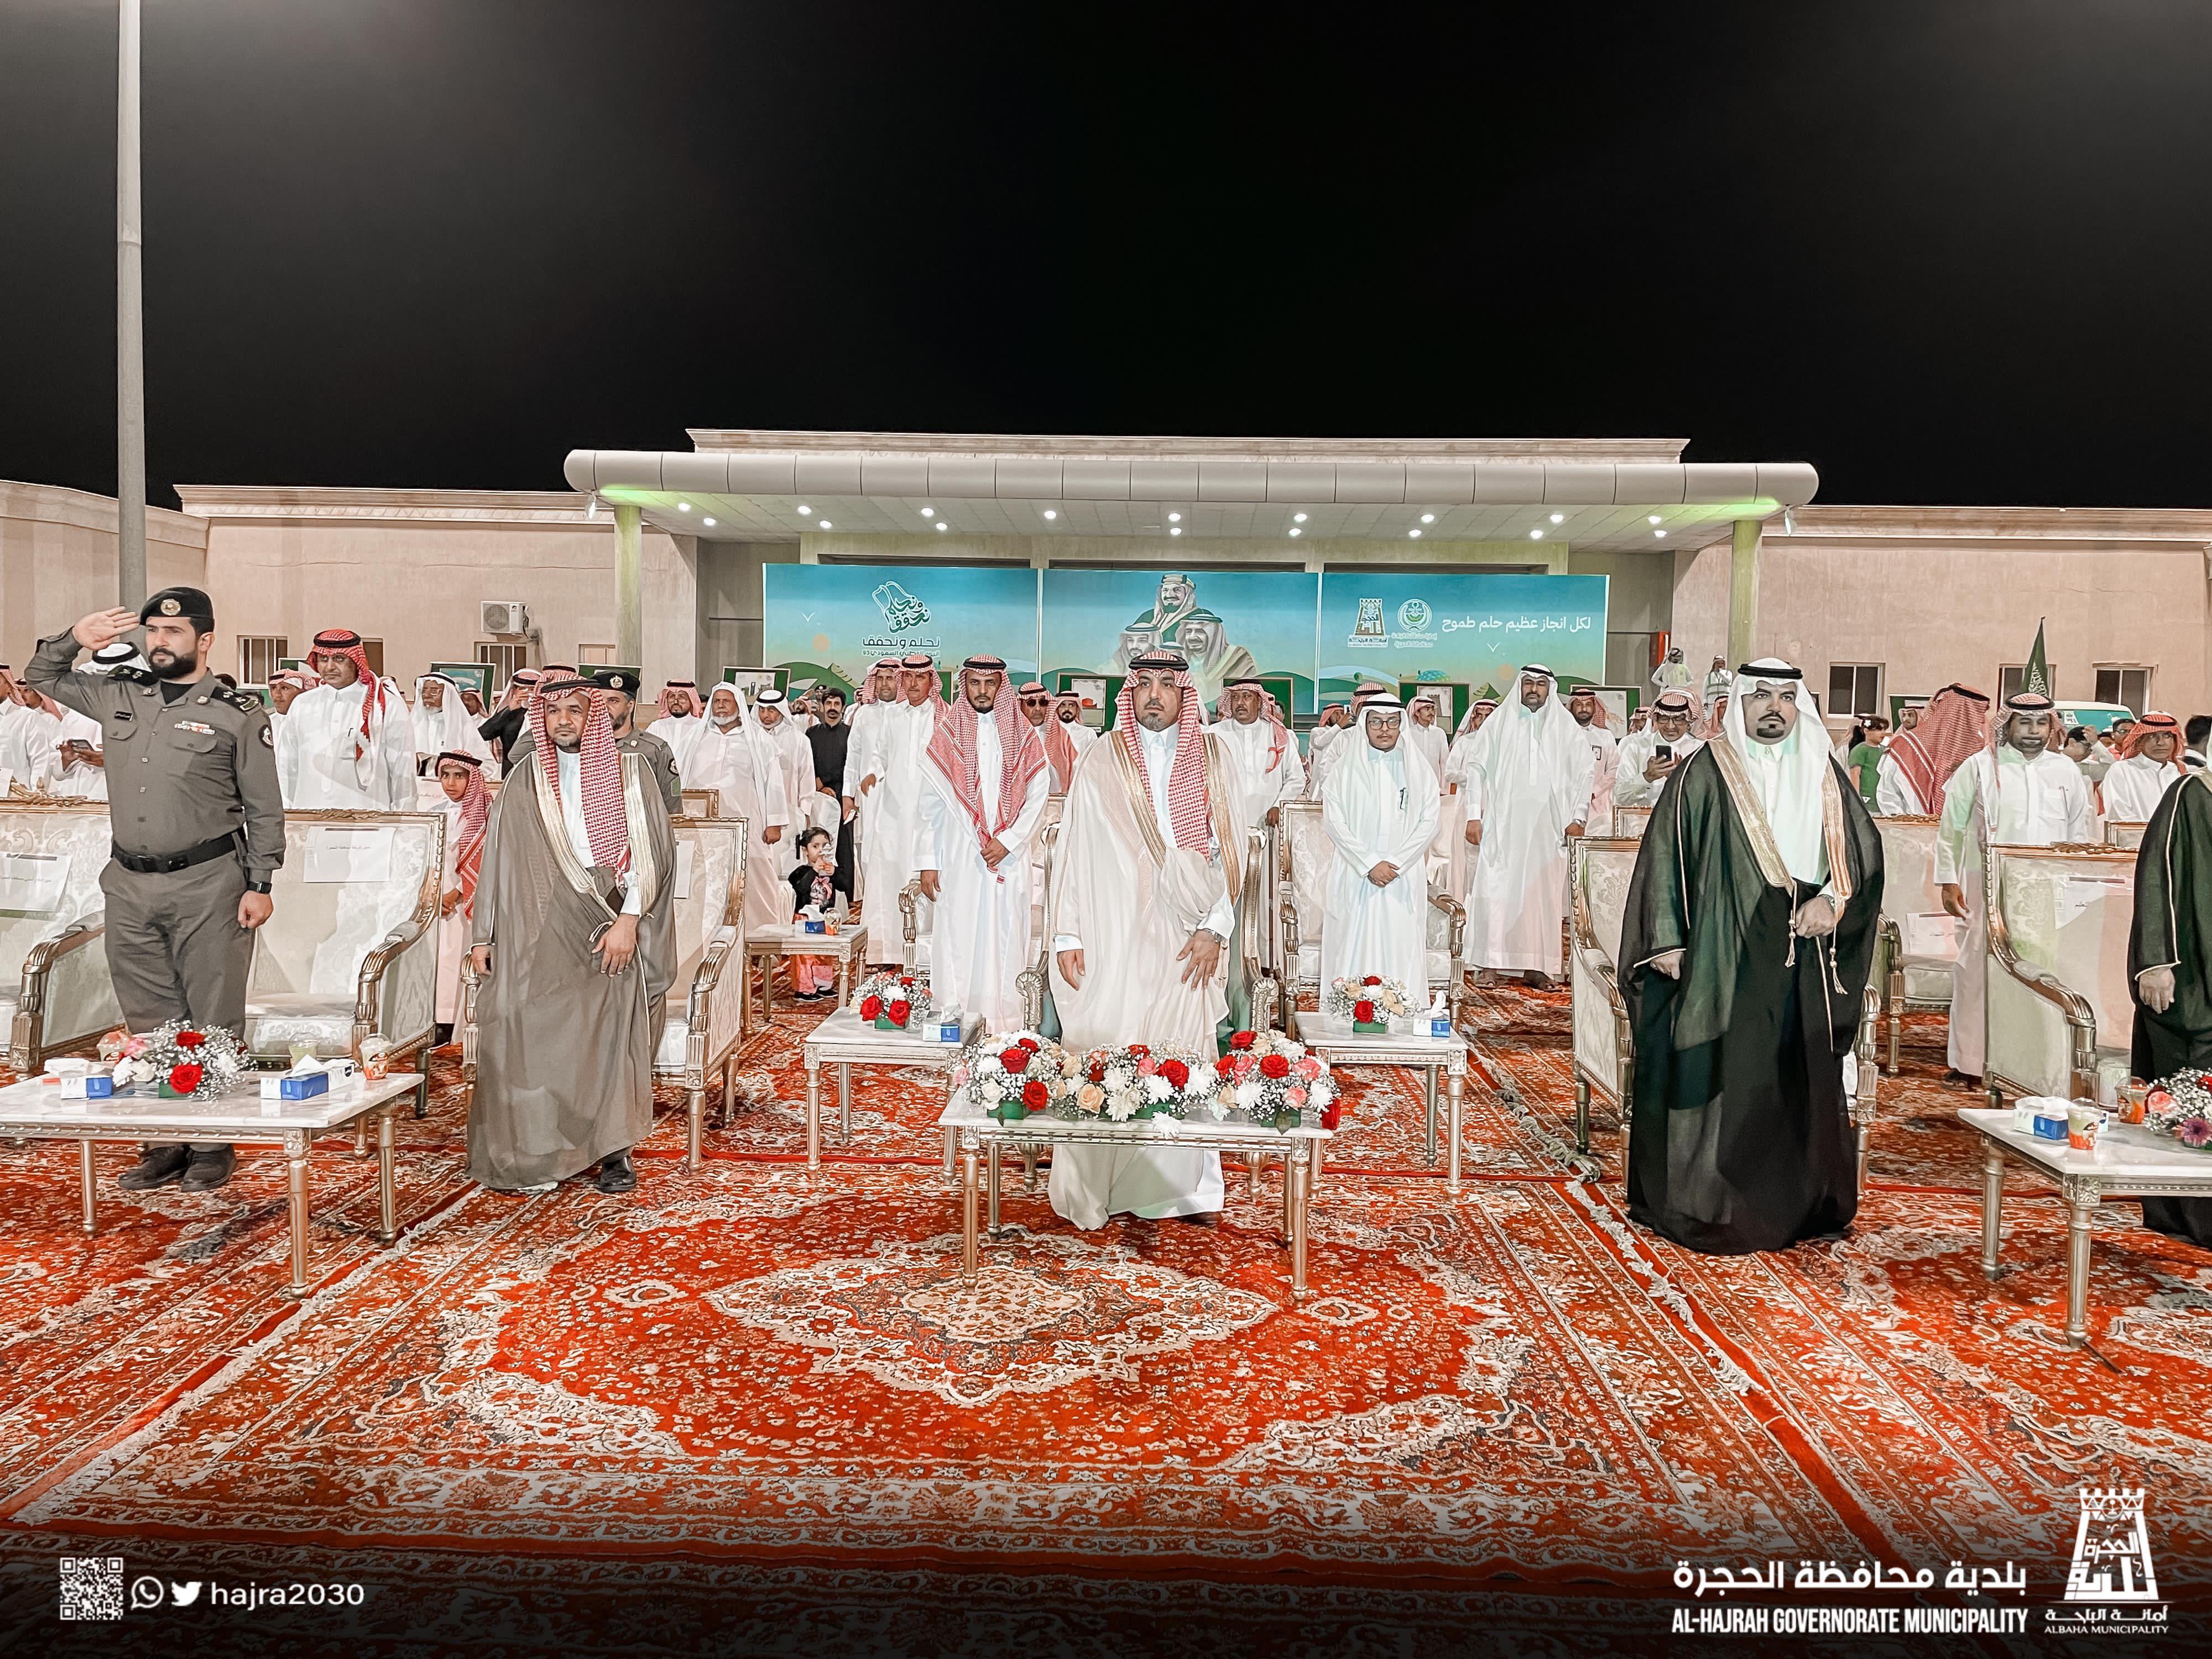 Celebration of the people of Al-Hajra Governorate on the occasion of the 93rd Saudi National Day